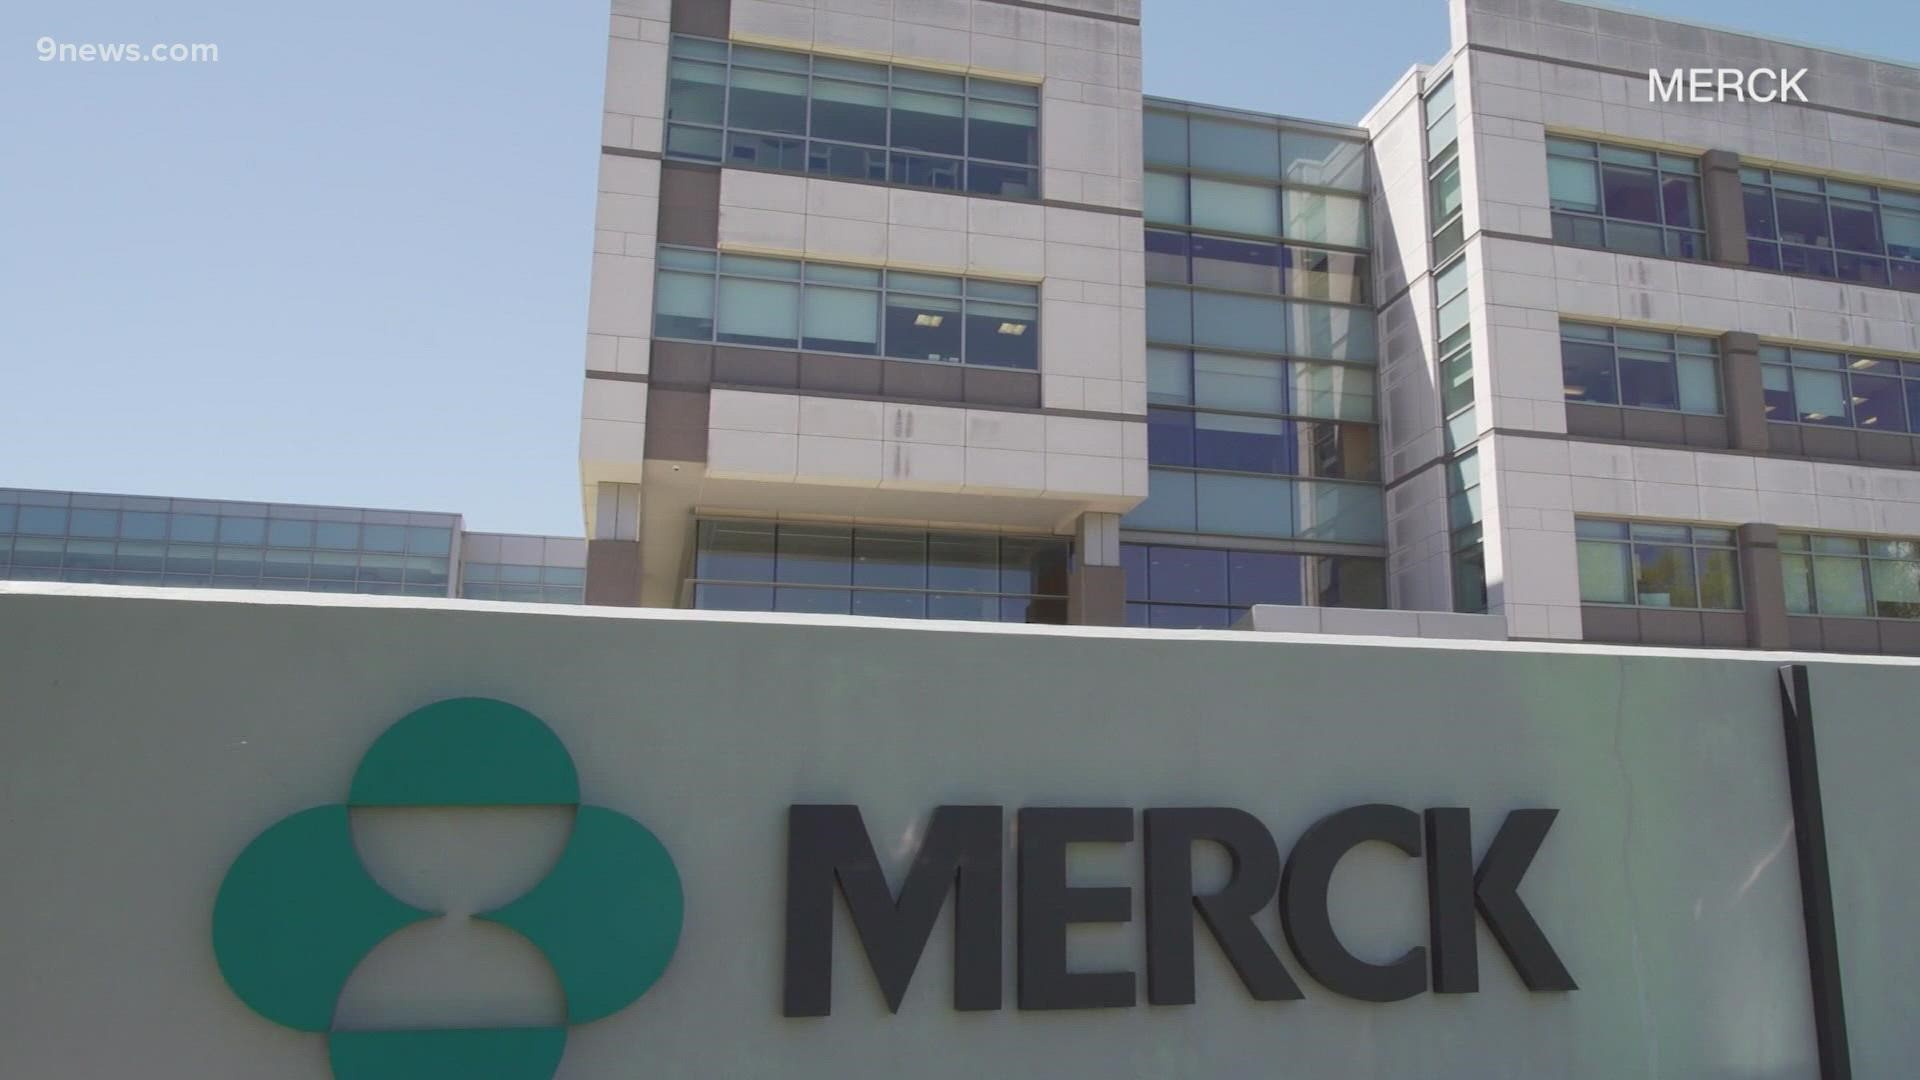 Merck has now applied for emergency use authorization from the FDA for its new antiviral COVID-19 pill.